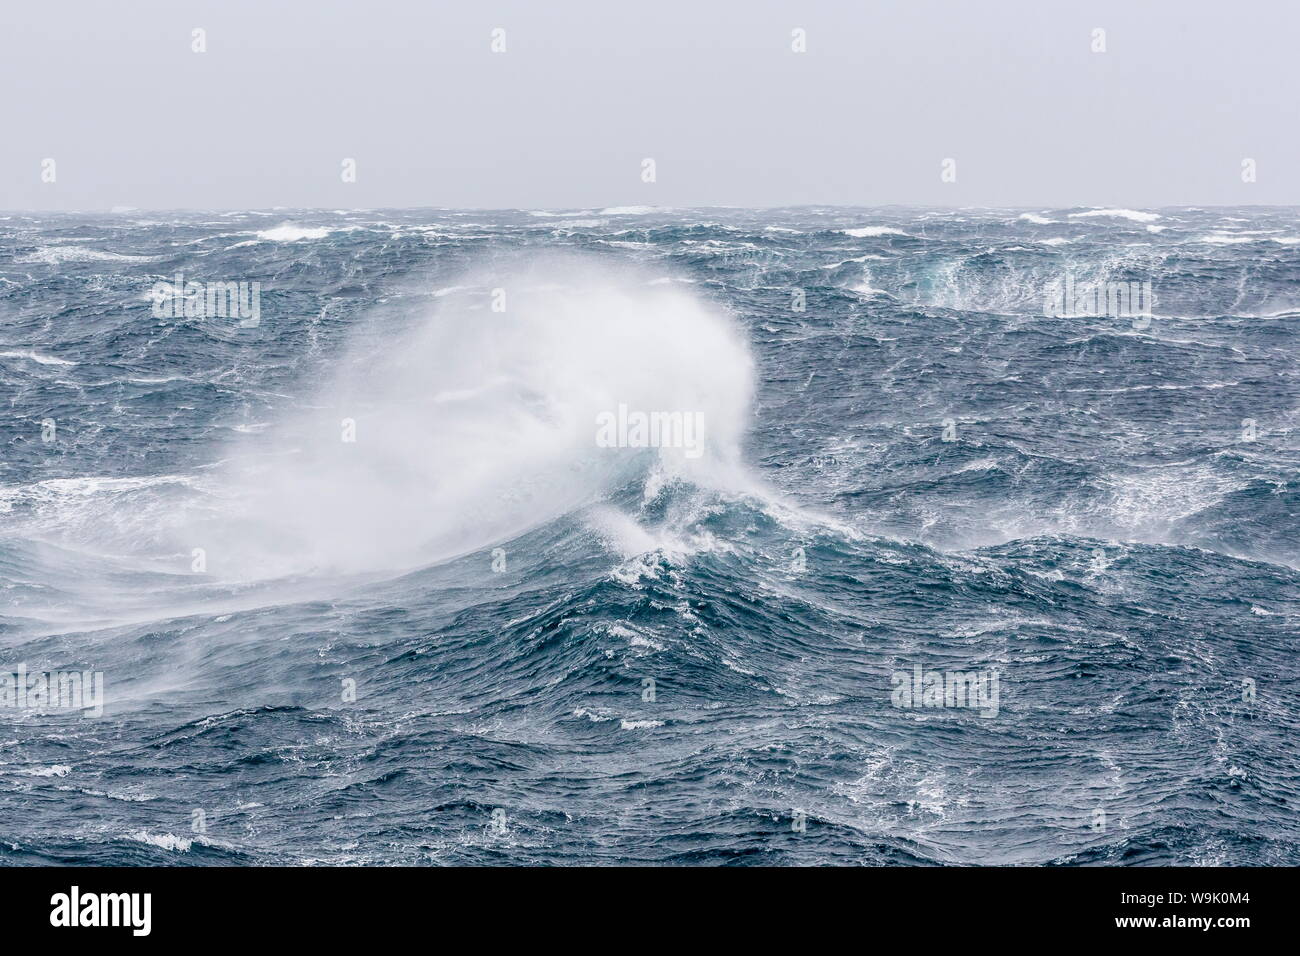 Gale force westerly winds build large waves in the Drake Passage, Antarctica, Polar Regions Stock Photo